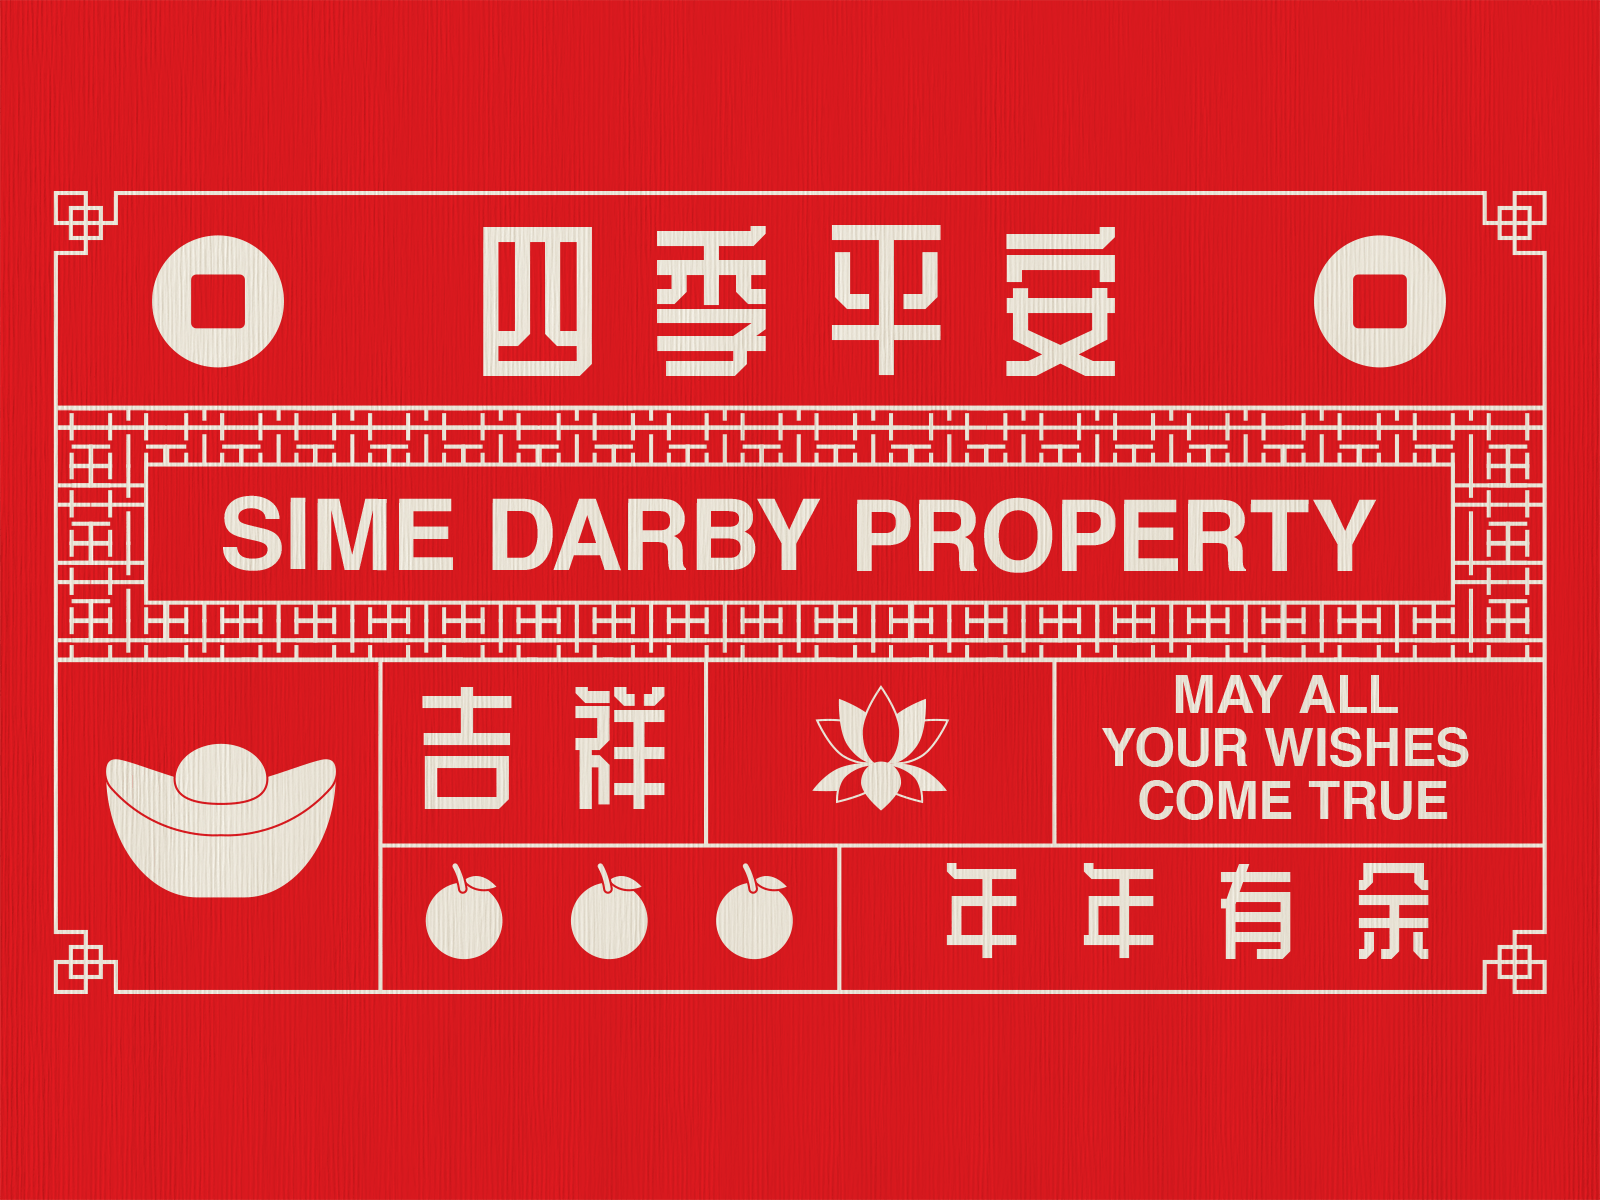 Sime Darby Chinese New Year 2020 campaign cover photo with changing greetings